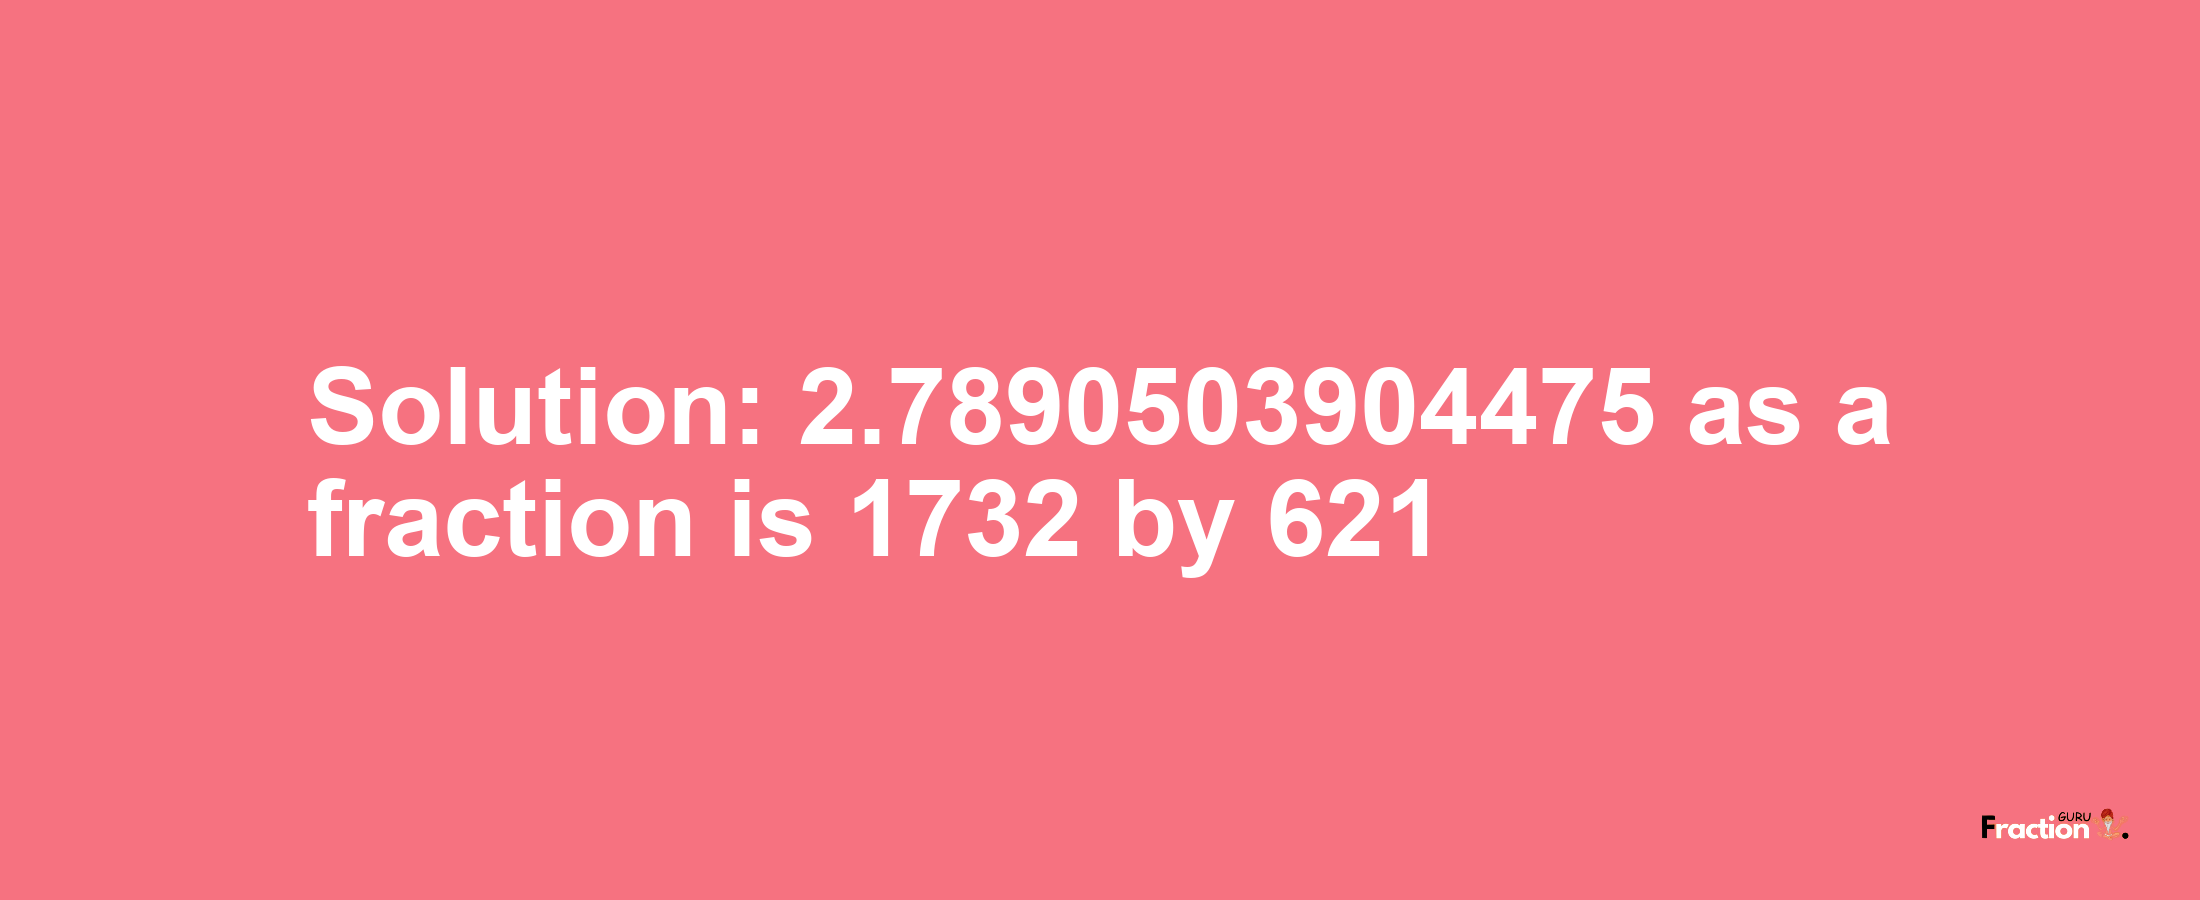 Solution:2.7890503904475 as a fraction is 1732/621